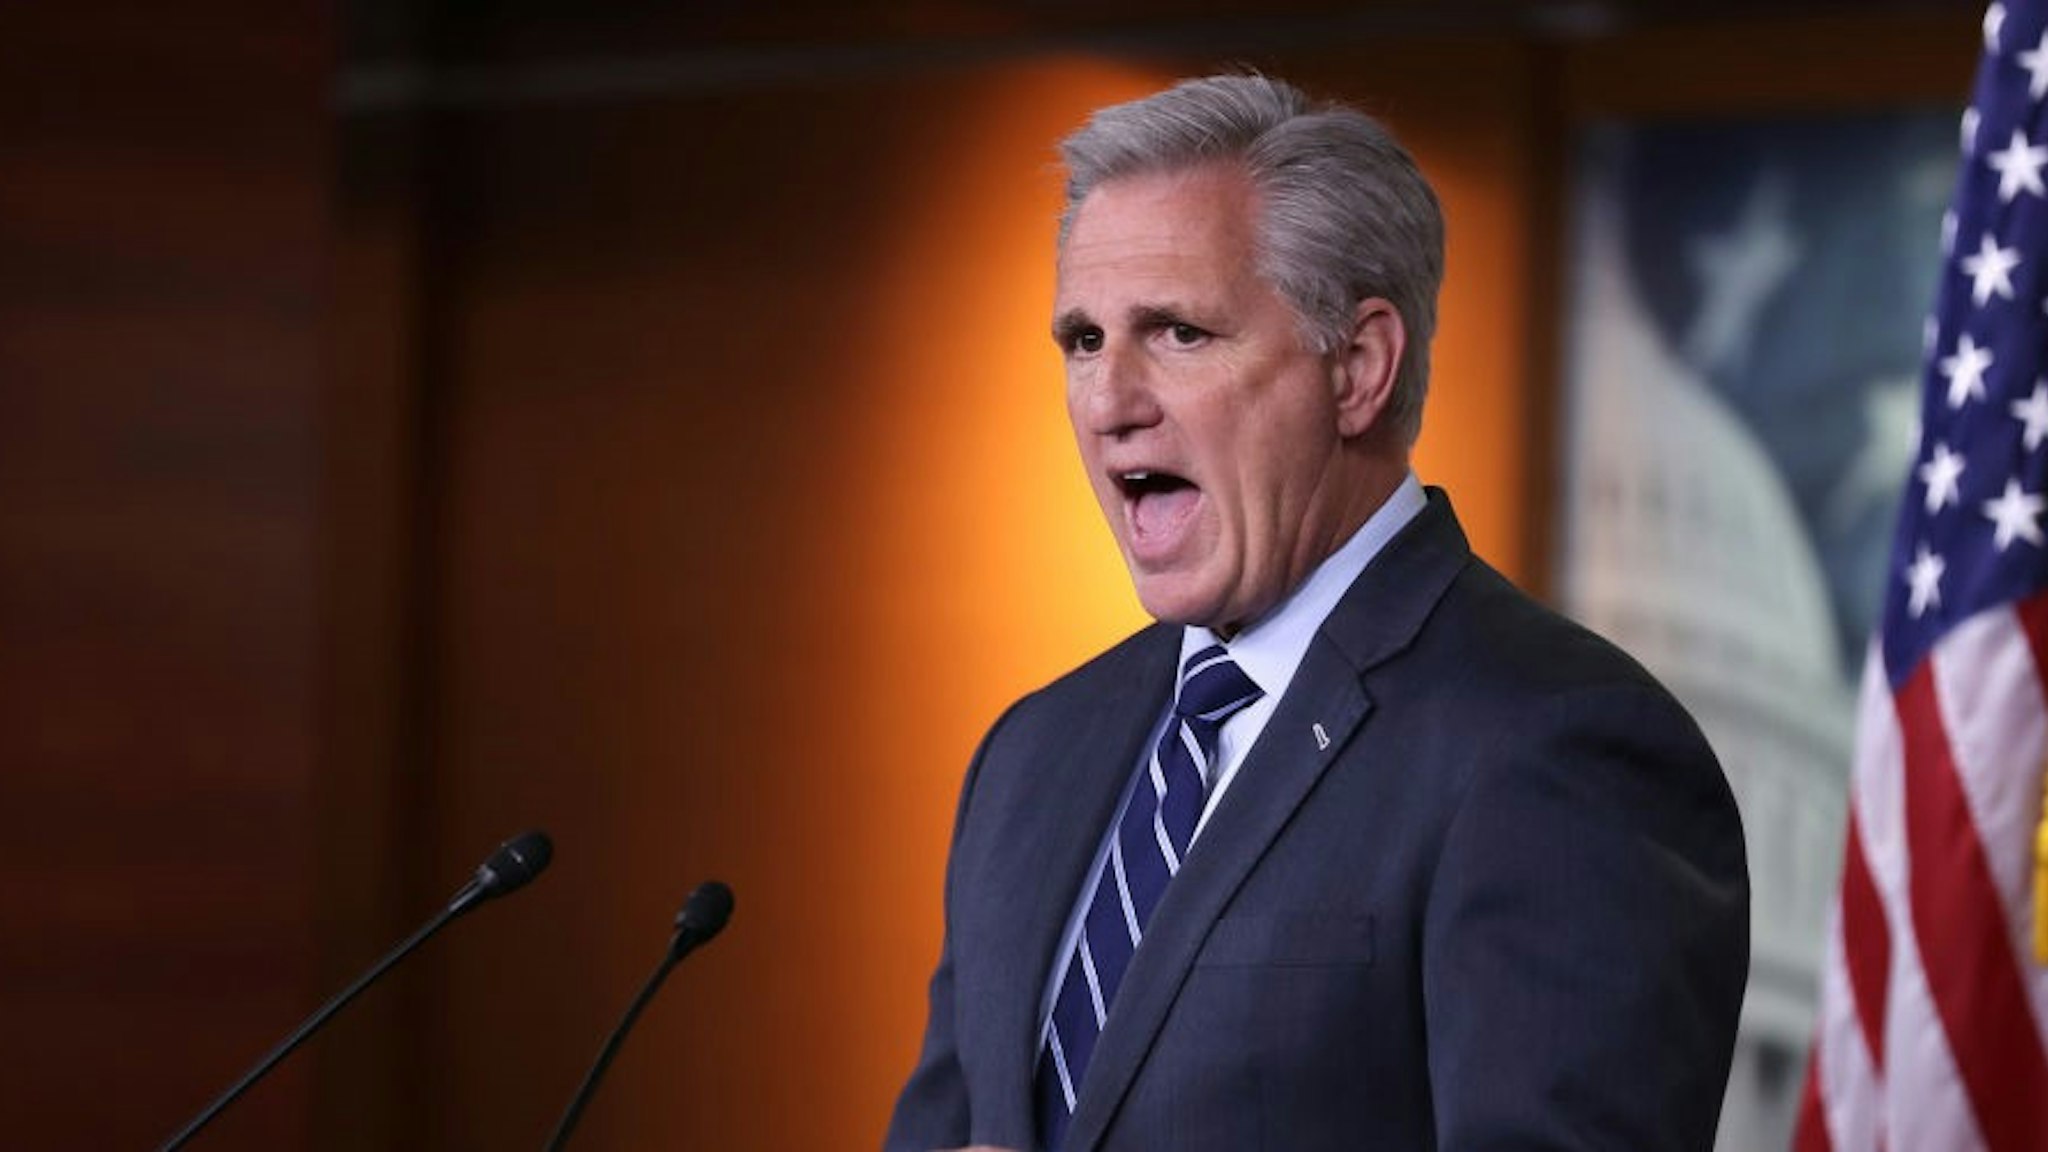 WASHINGTON, DC - JUNE 13: House Minority Leader Kevin McCarthy (R-CA) holds his weekly news conference at the U.S. Capitol June 13, 2019 in Washington, DC. In the wake of remarks by President Donald Trump that he would accept compromising information about a political opponent from a foreign power, McCarthy said that he would support legislation proposed by Democrats that would require people to report to the FBI if they are approached with offers of that information. (Photo by